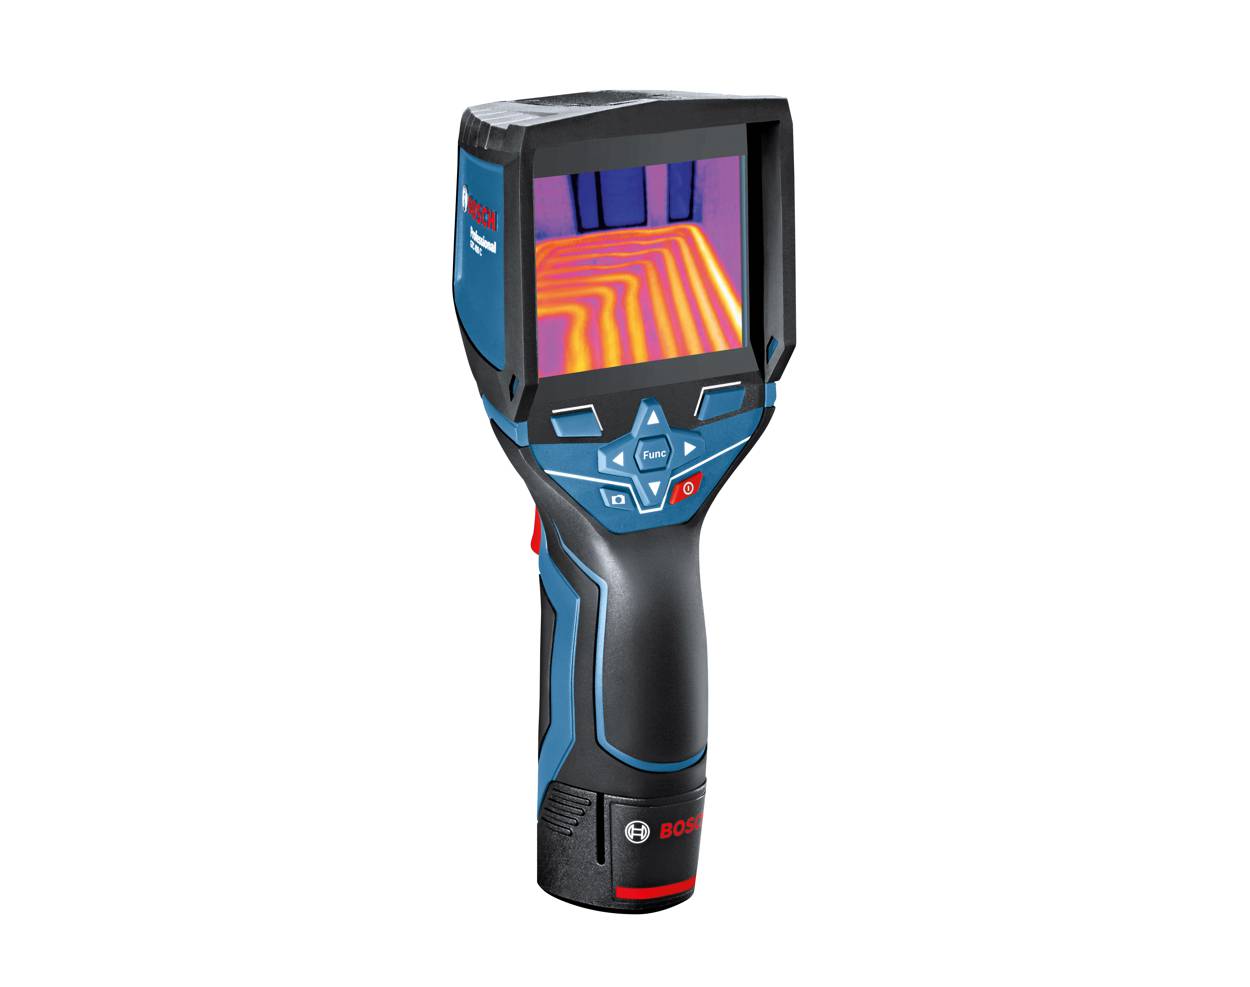 Bosch Power Tools unveils ground-breaking new Thermal Camera for jobsites